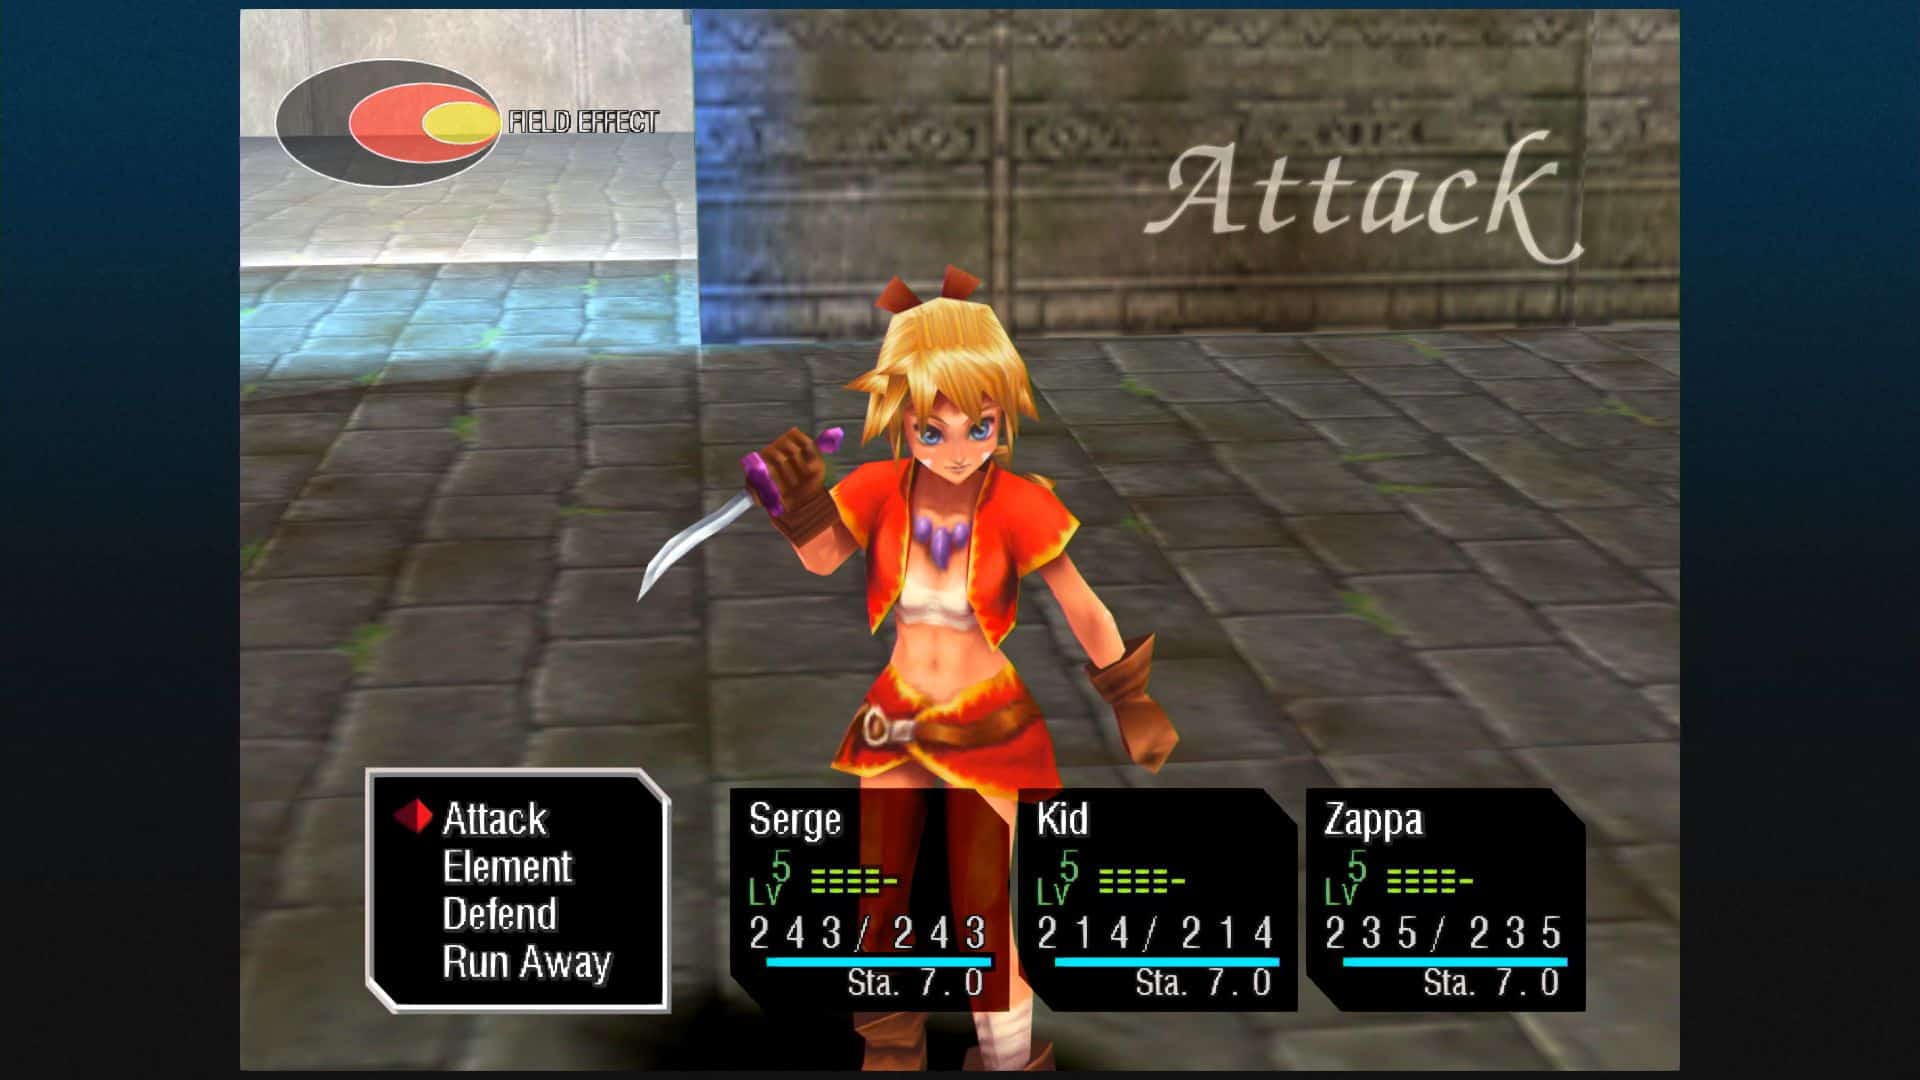 If the Chrono Cross Remaster Is Real, Please Let it Look Like This